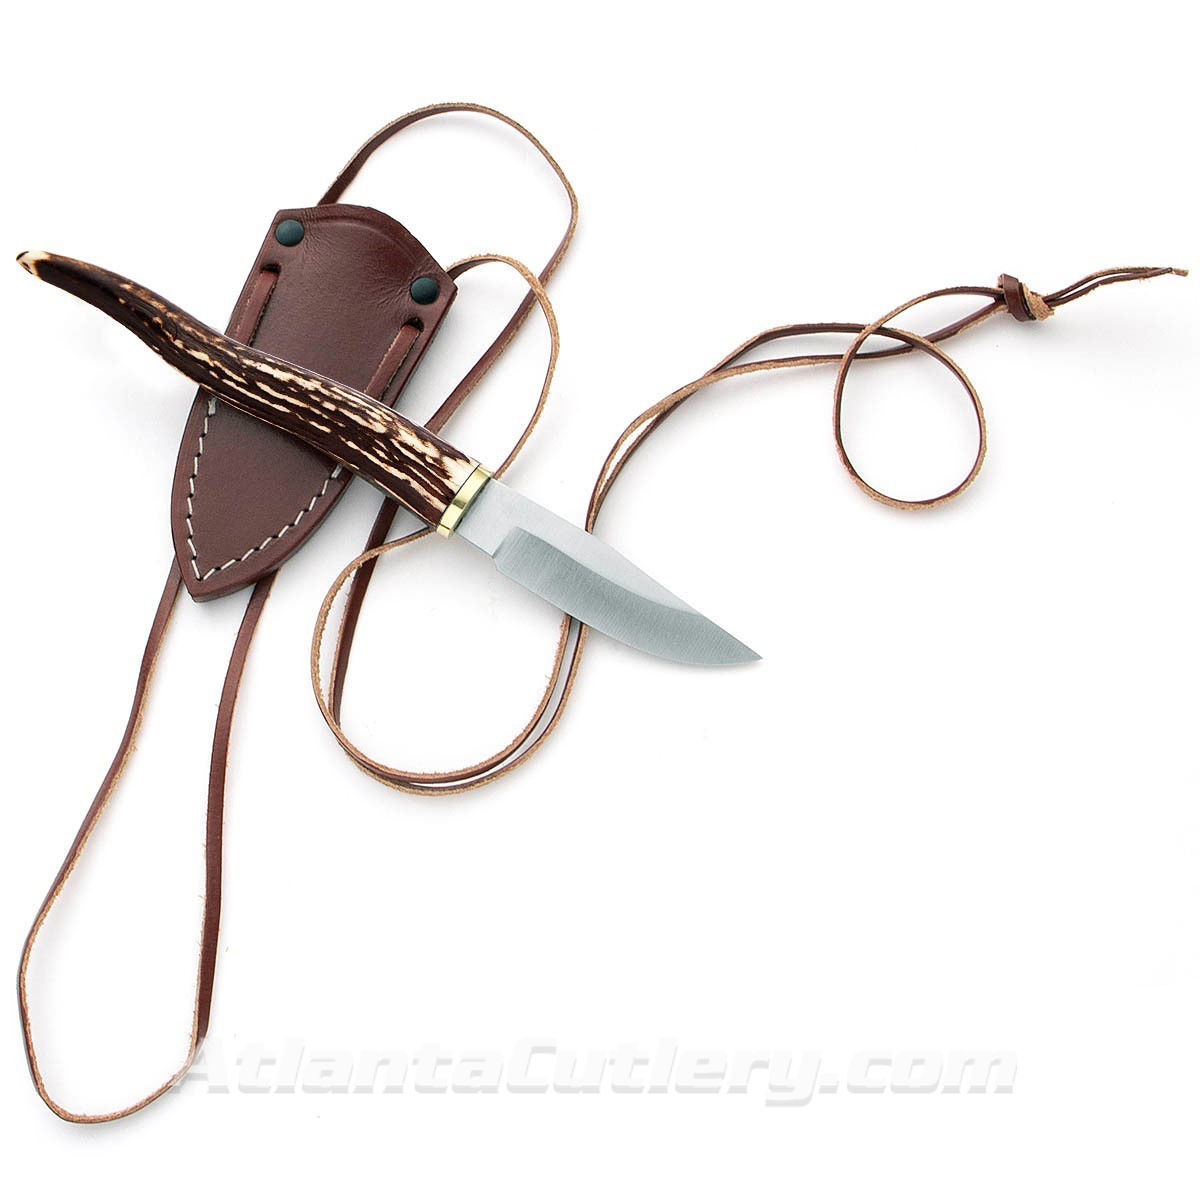 Stag Neck Knife with Thong